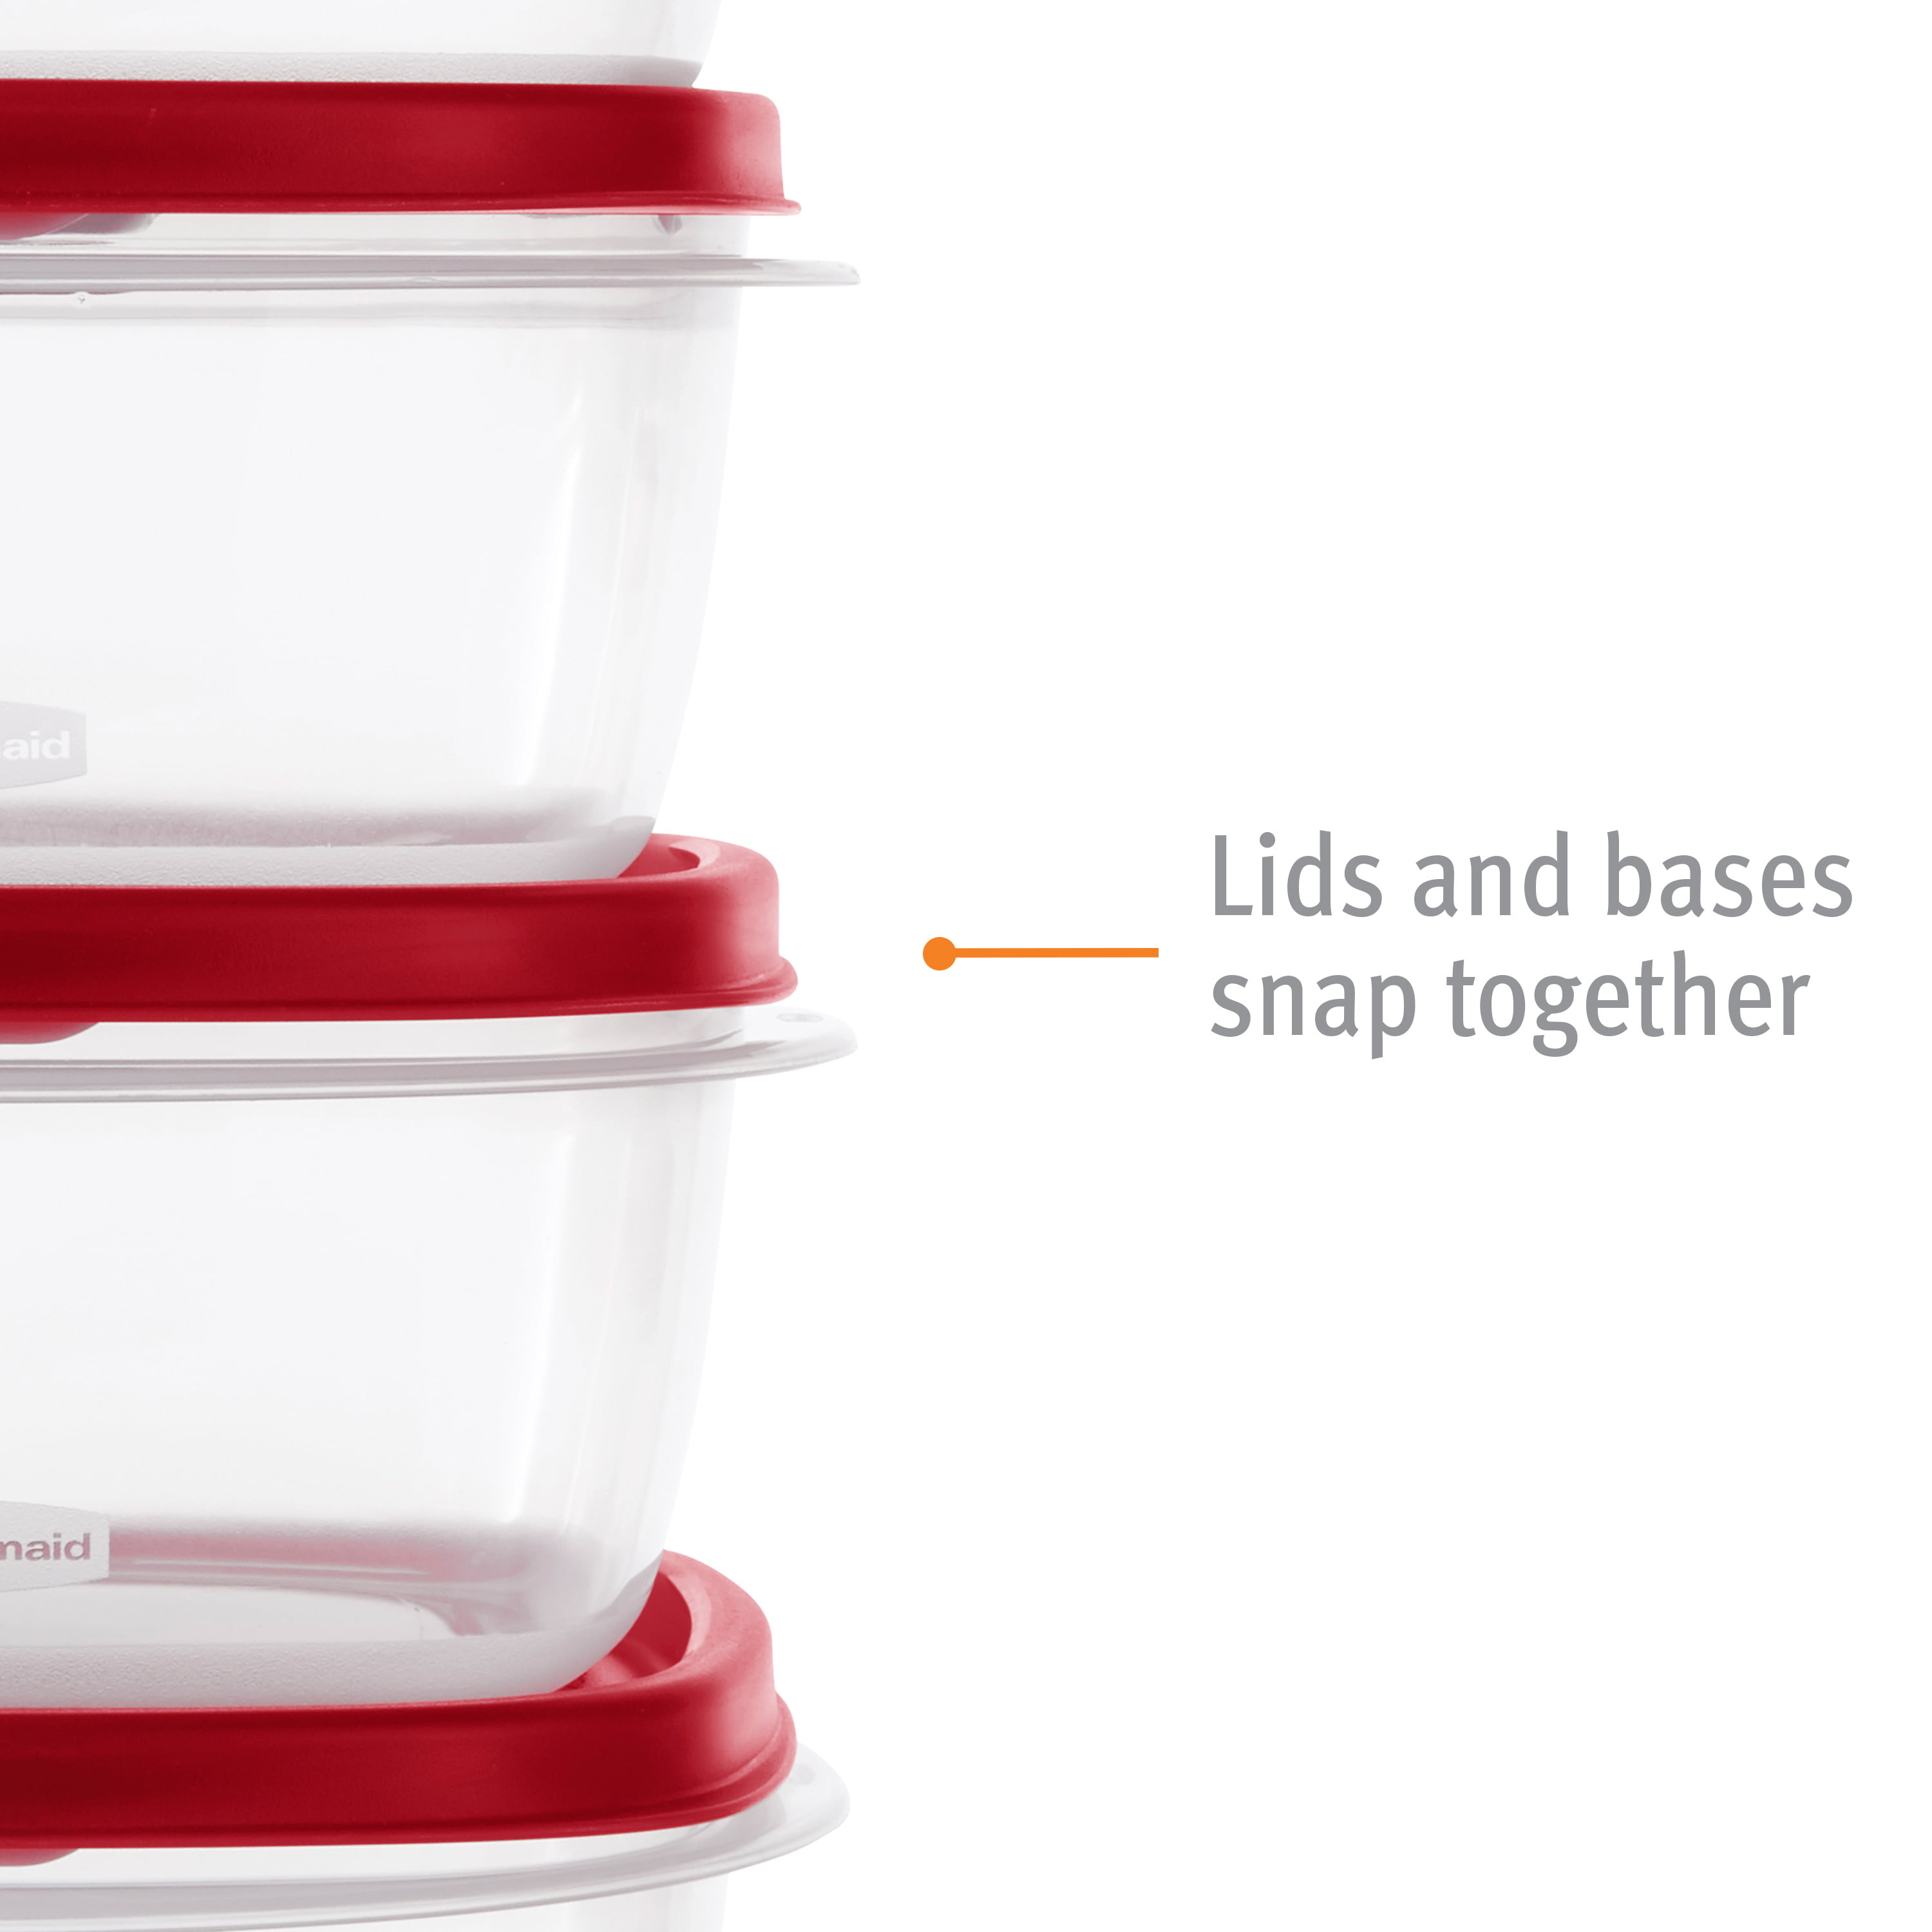 LARGE SET 28 pc Airtight Food Storage Containers w/ Lids - Retails For  $59.99